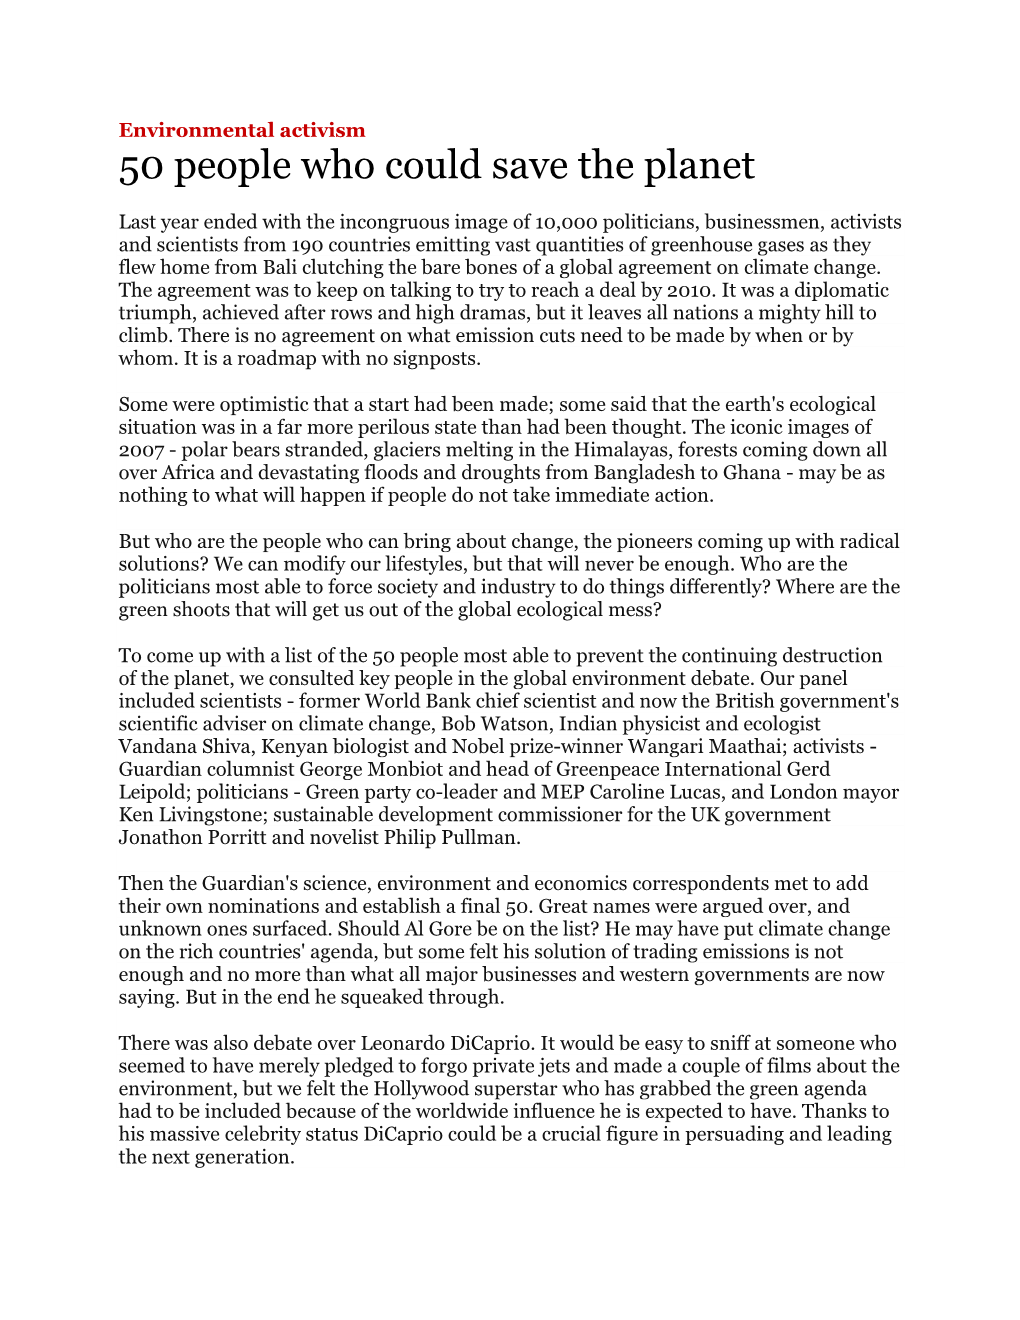 50 People Who Could Save the Planet